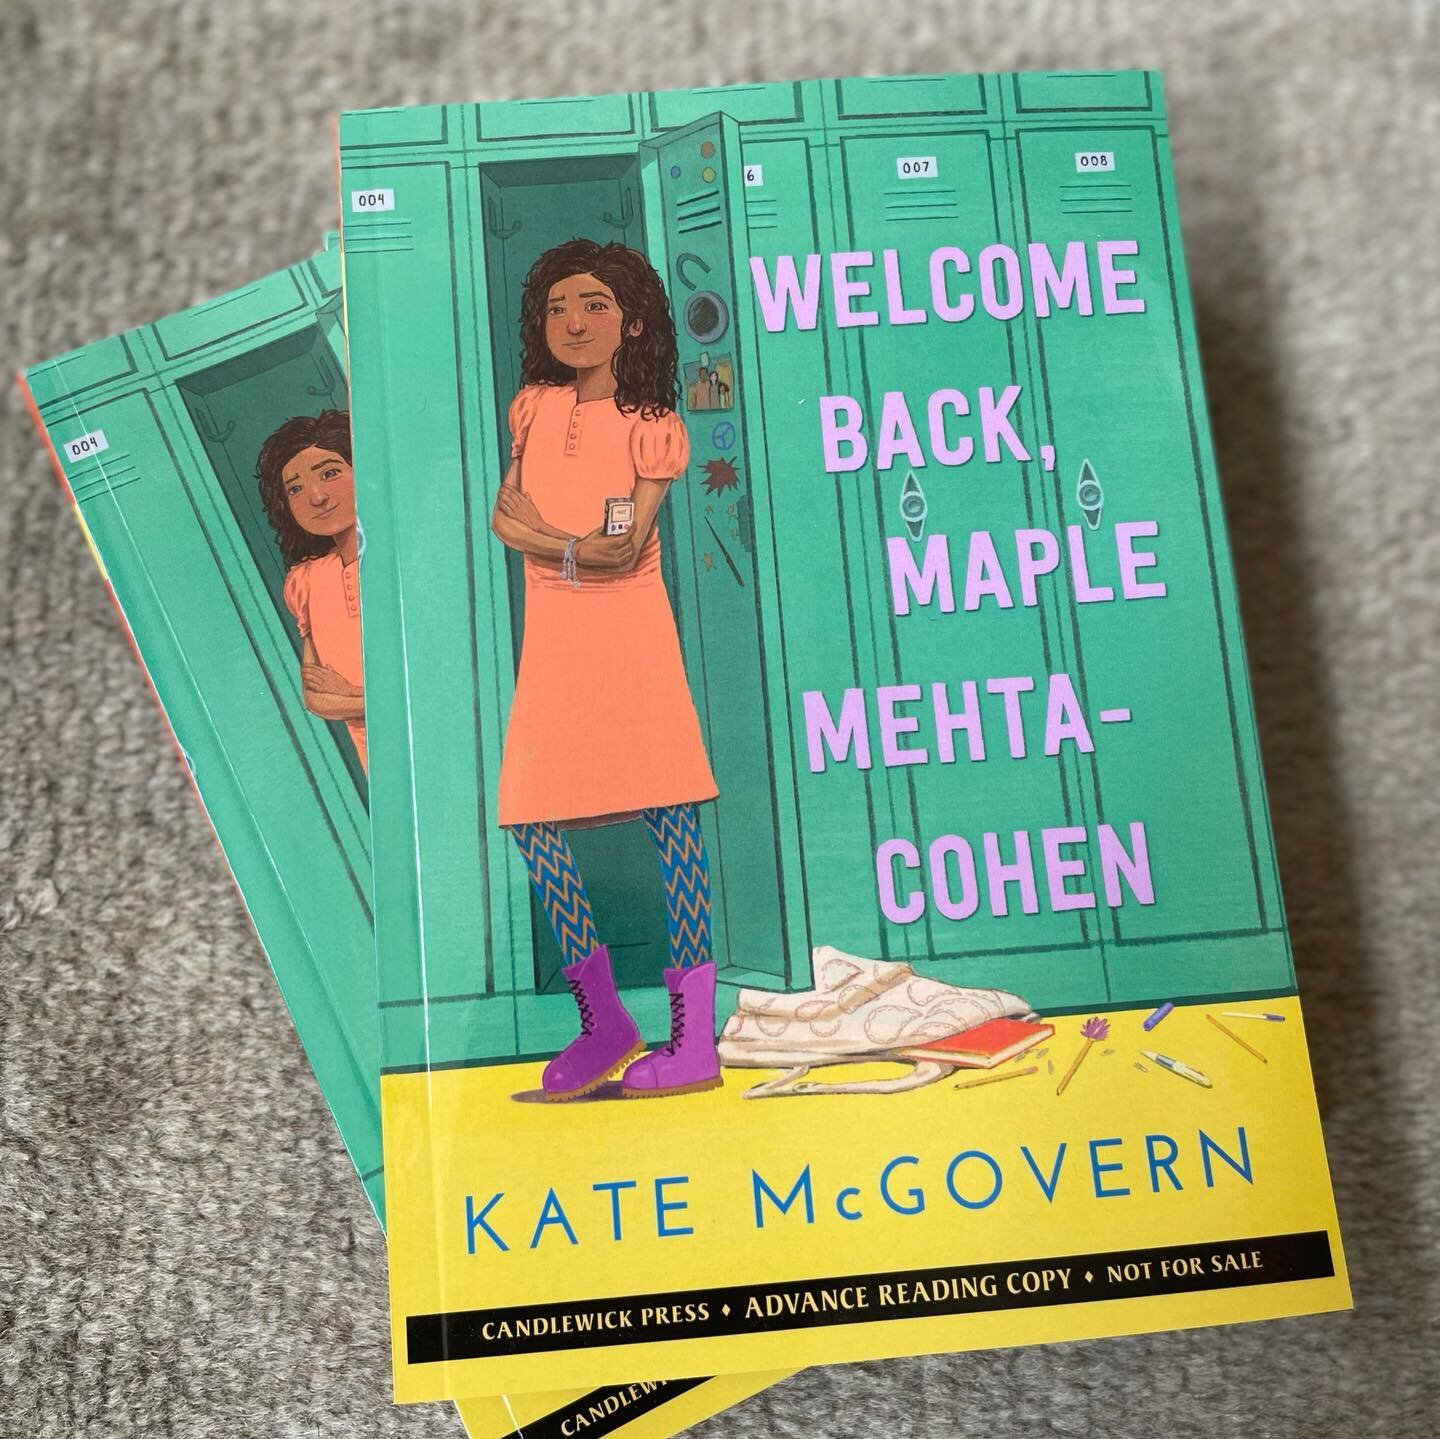 Advance copies of this beauty arrived today, and what a wonder to hold her in my hands after all this time. MAPLE is the first book I&rsquo;ve written with my own kids in mind as readers. Early reviews: shiny cover, bright colors, tastes good. I&rsqu